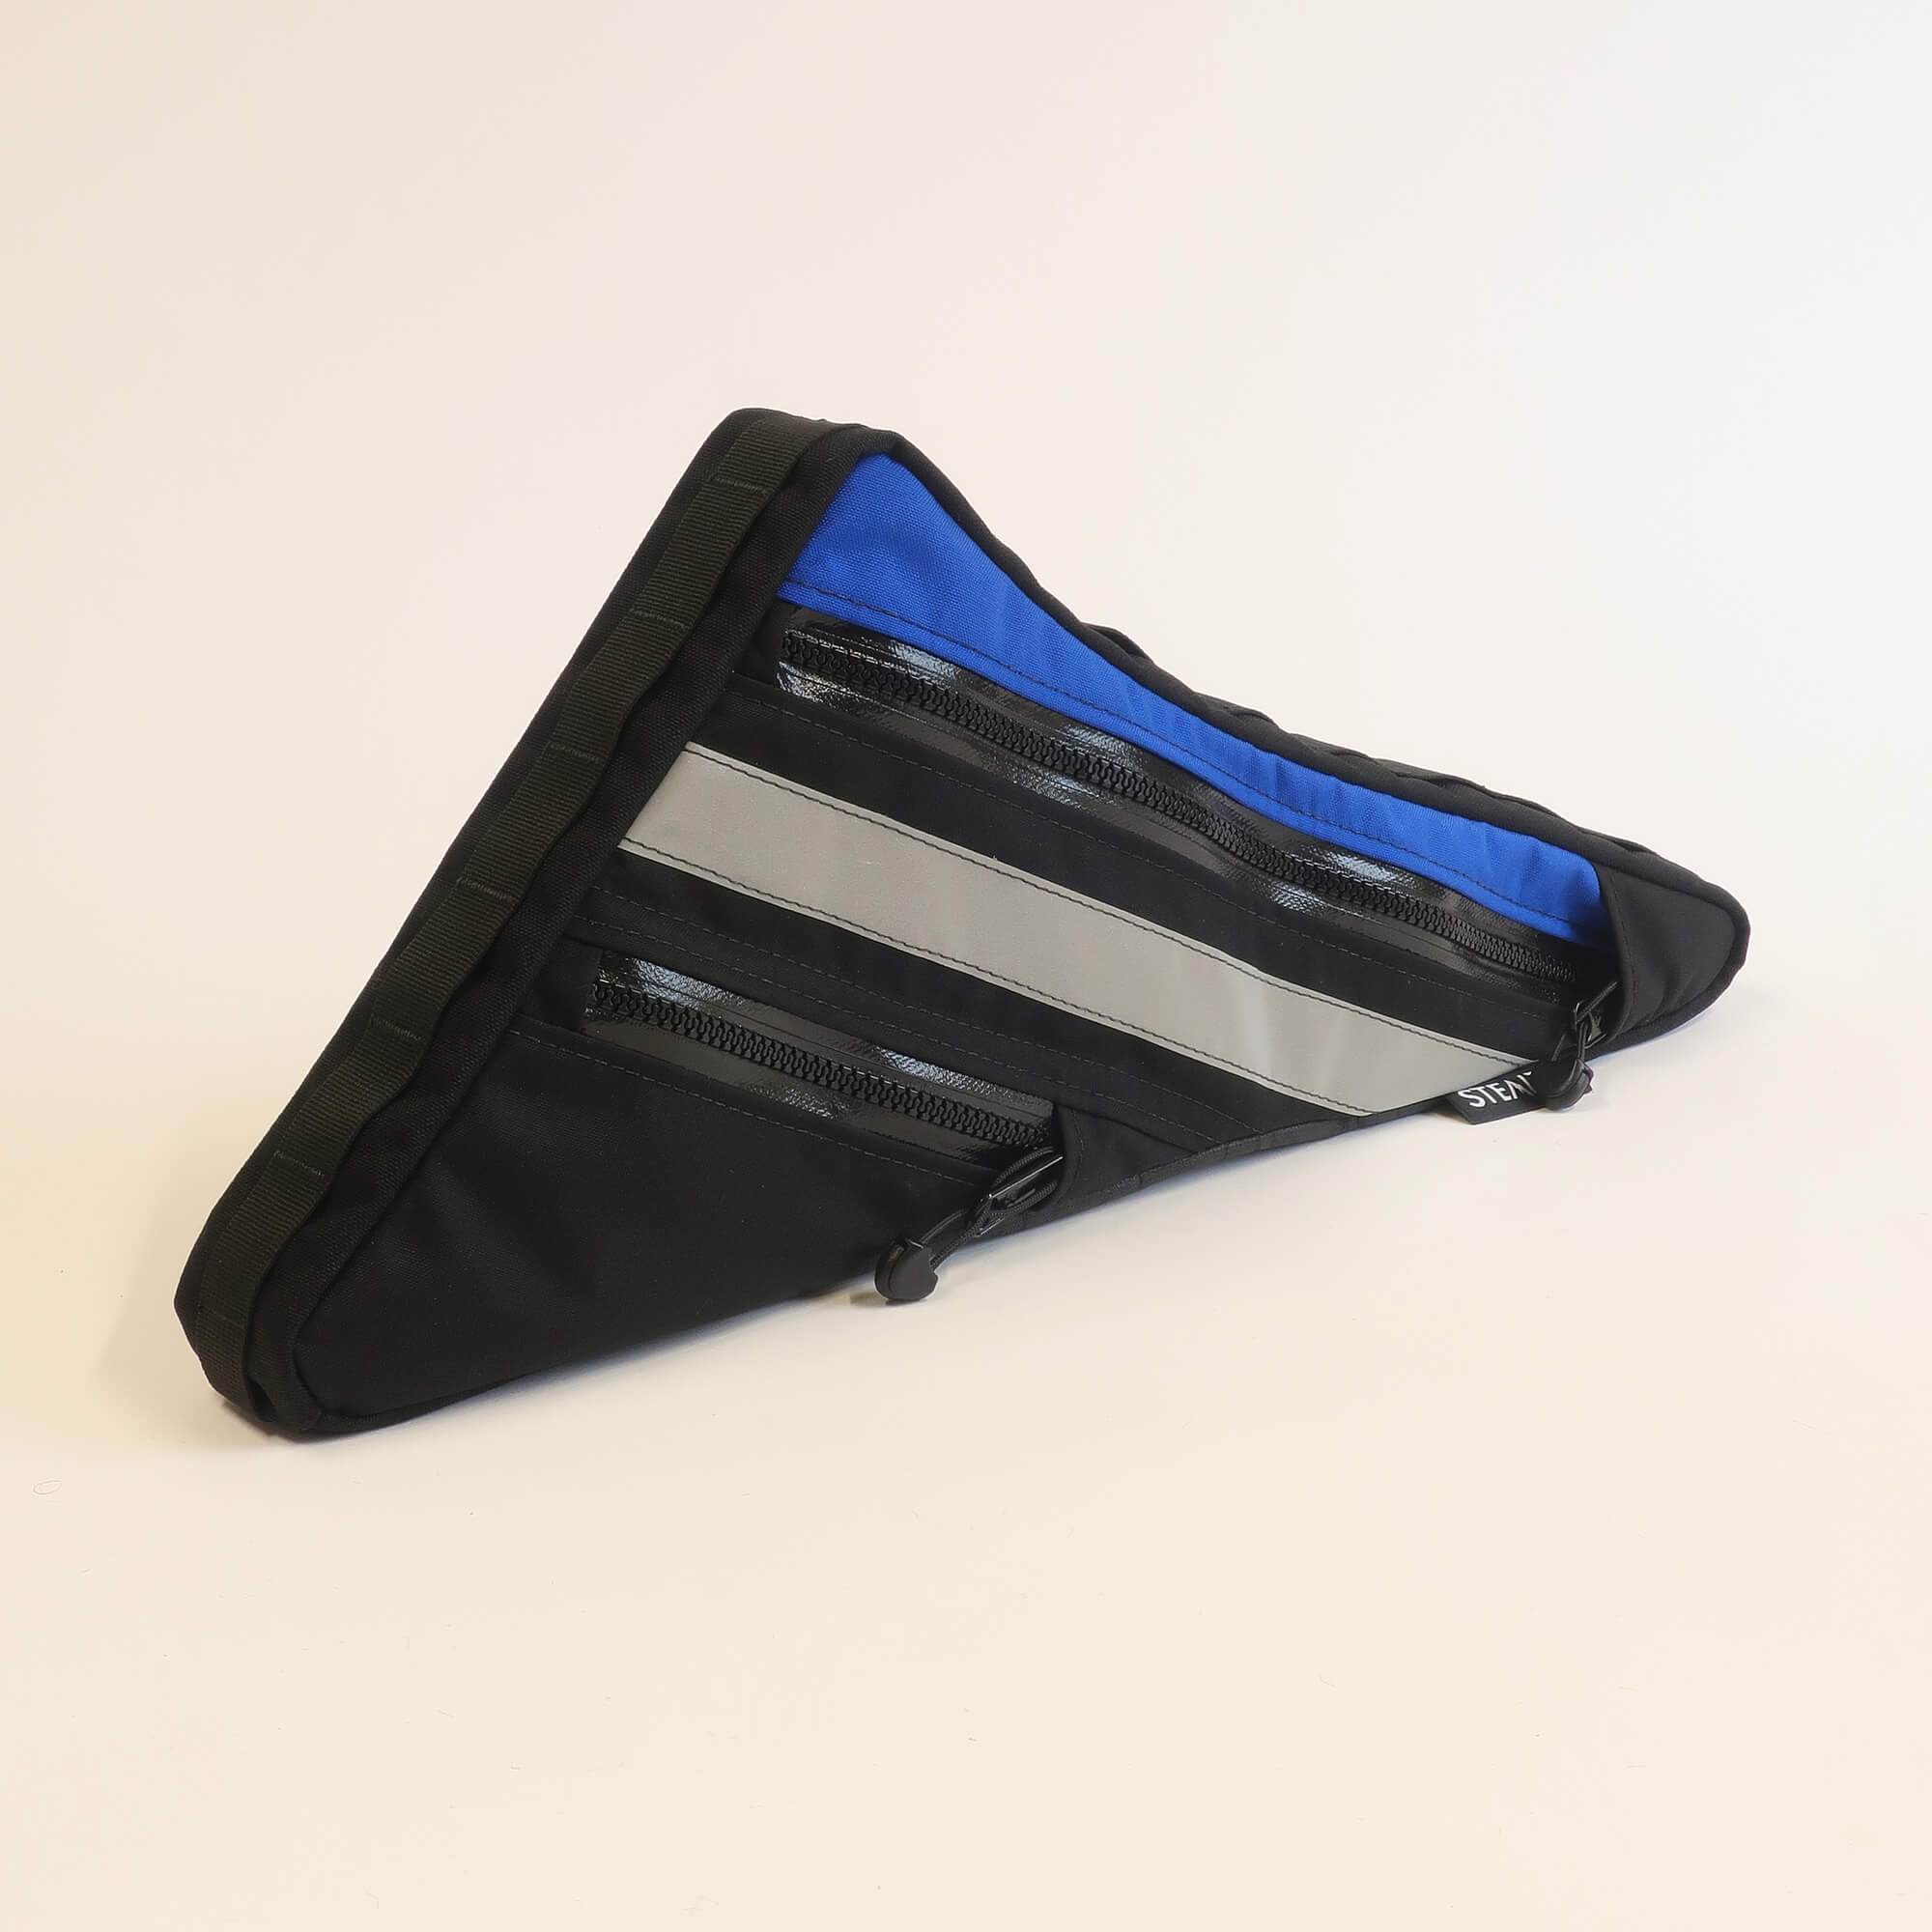 Double zip frame bag black and blue